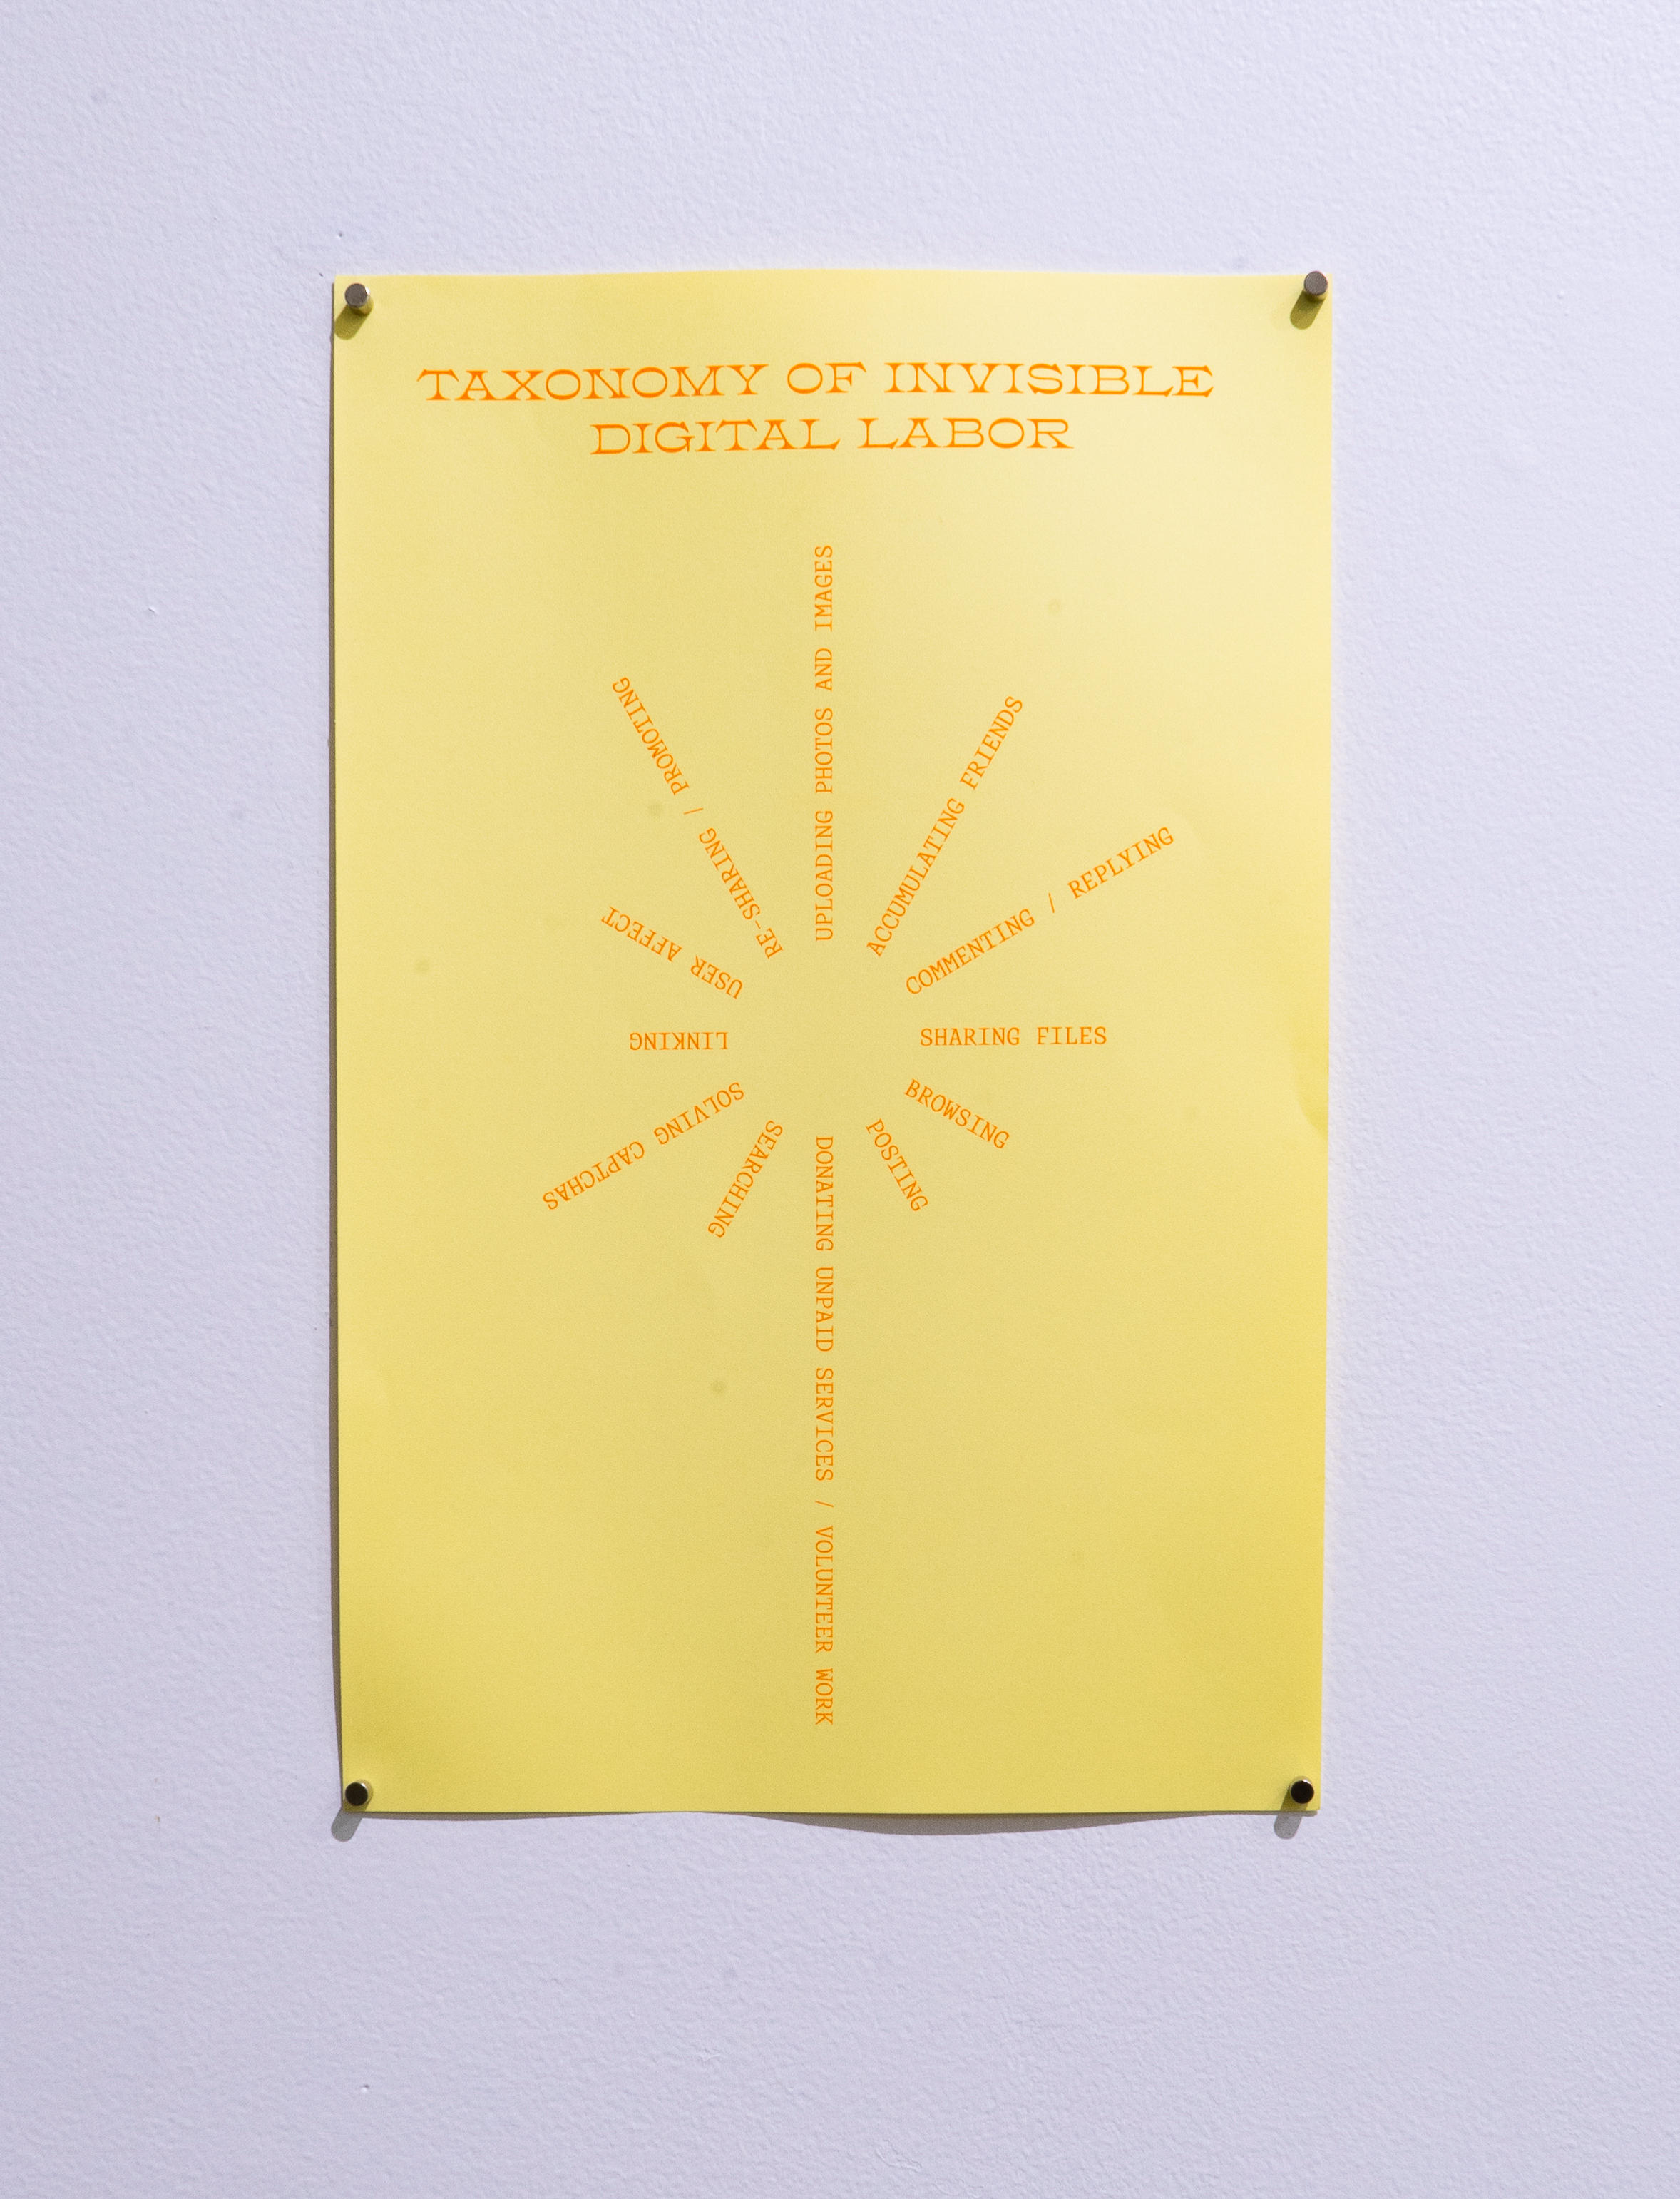 Taxonomy of Invisible Digital Labor, 11” x 17”